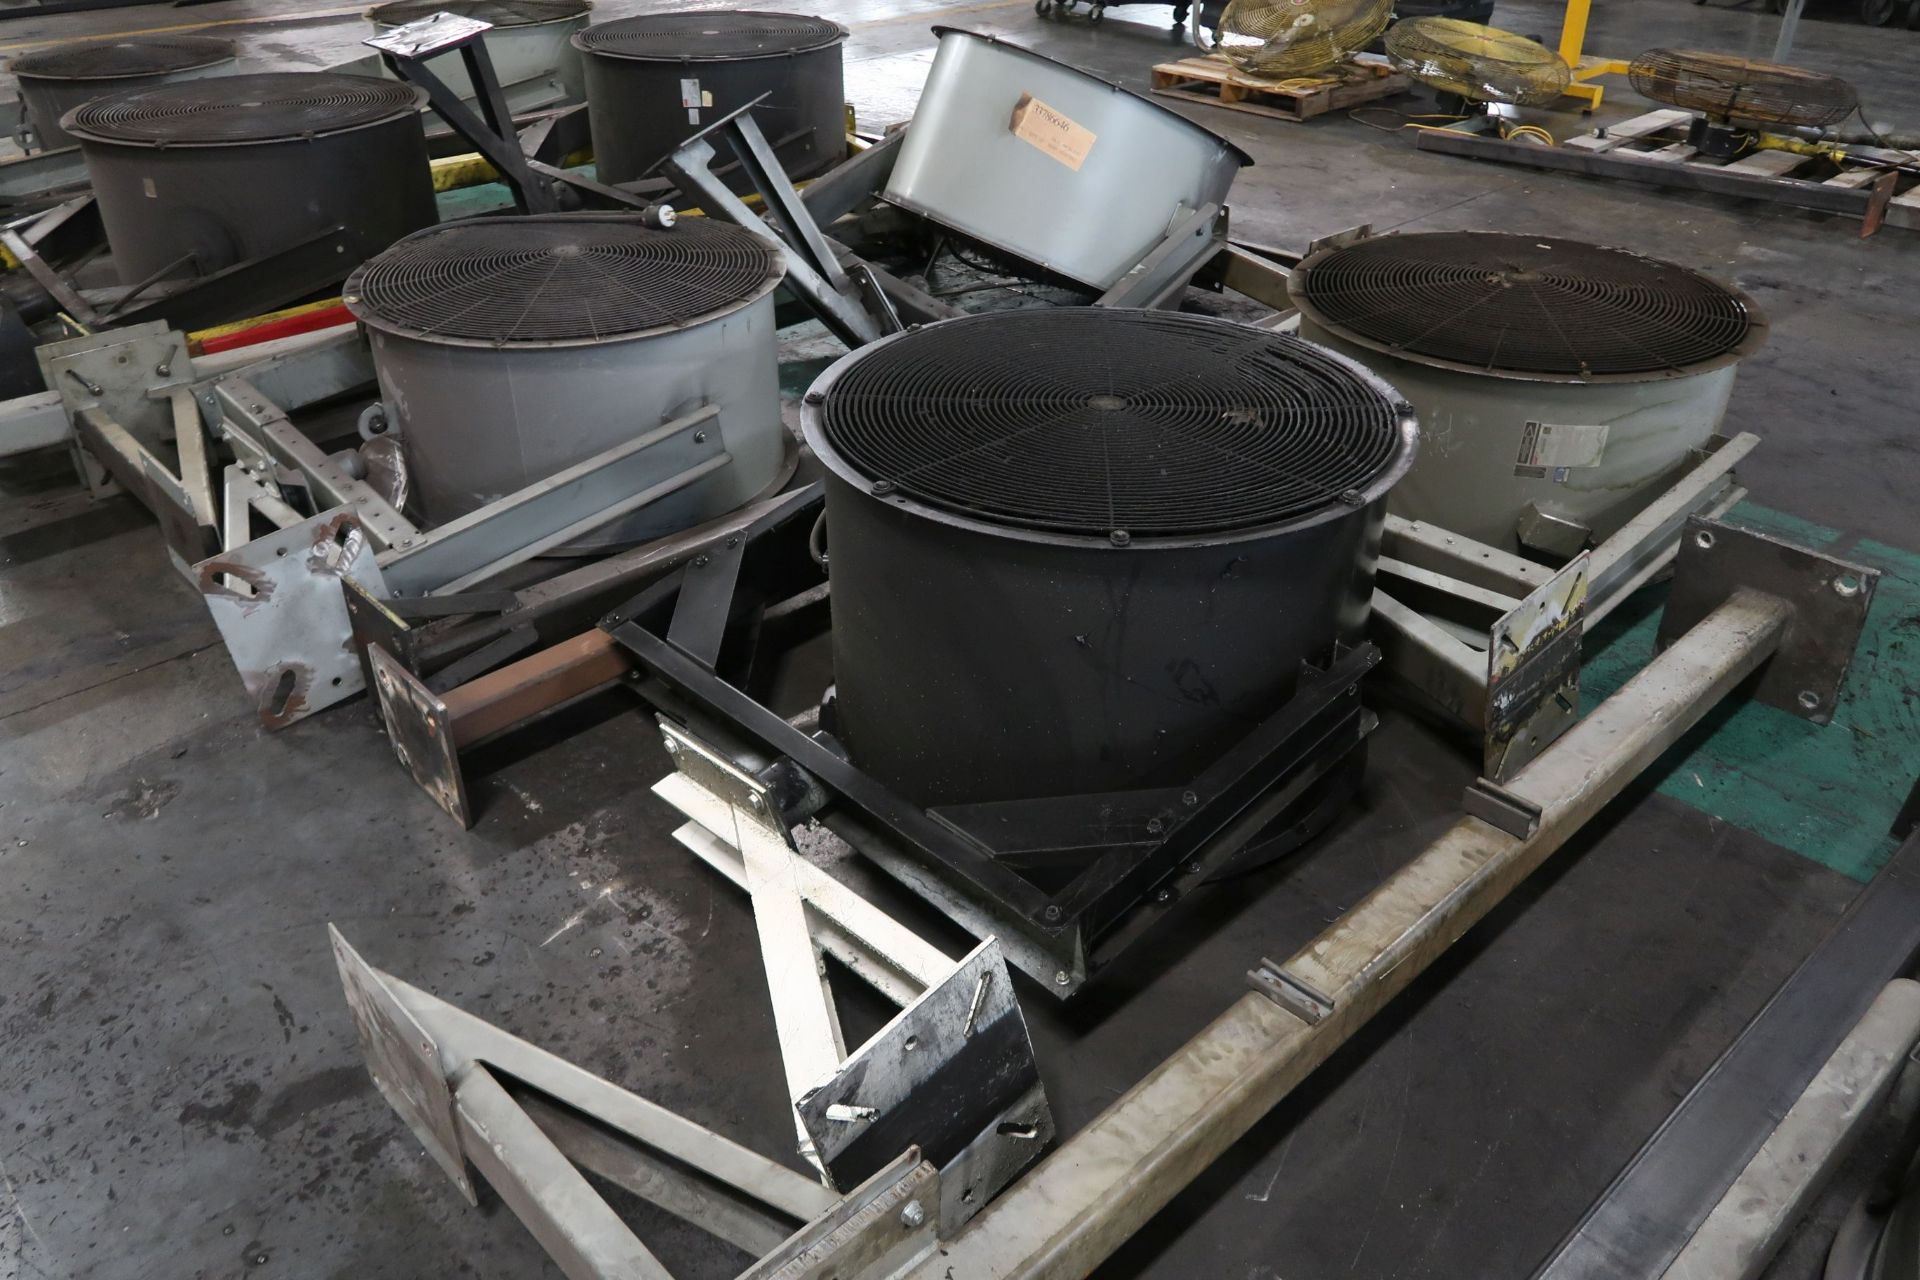 CIRCULAR FANS WITH FLOOR POSTS AND MOUNTING **LOADING PRICE DUE TO ERRA - $50.00** - Image 2 of 2